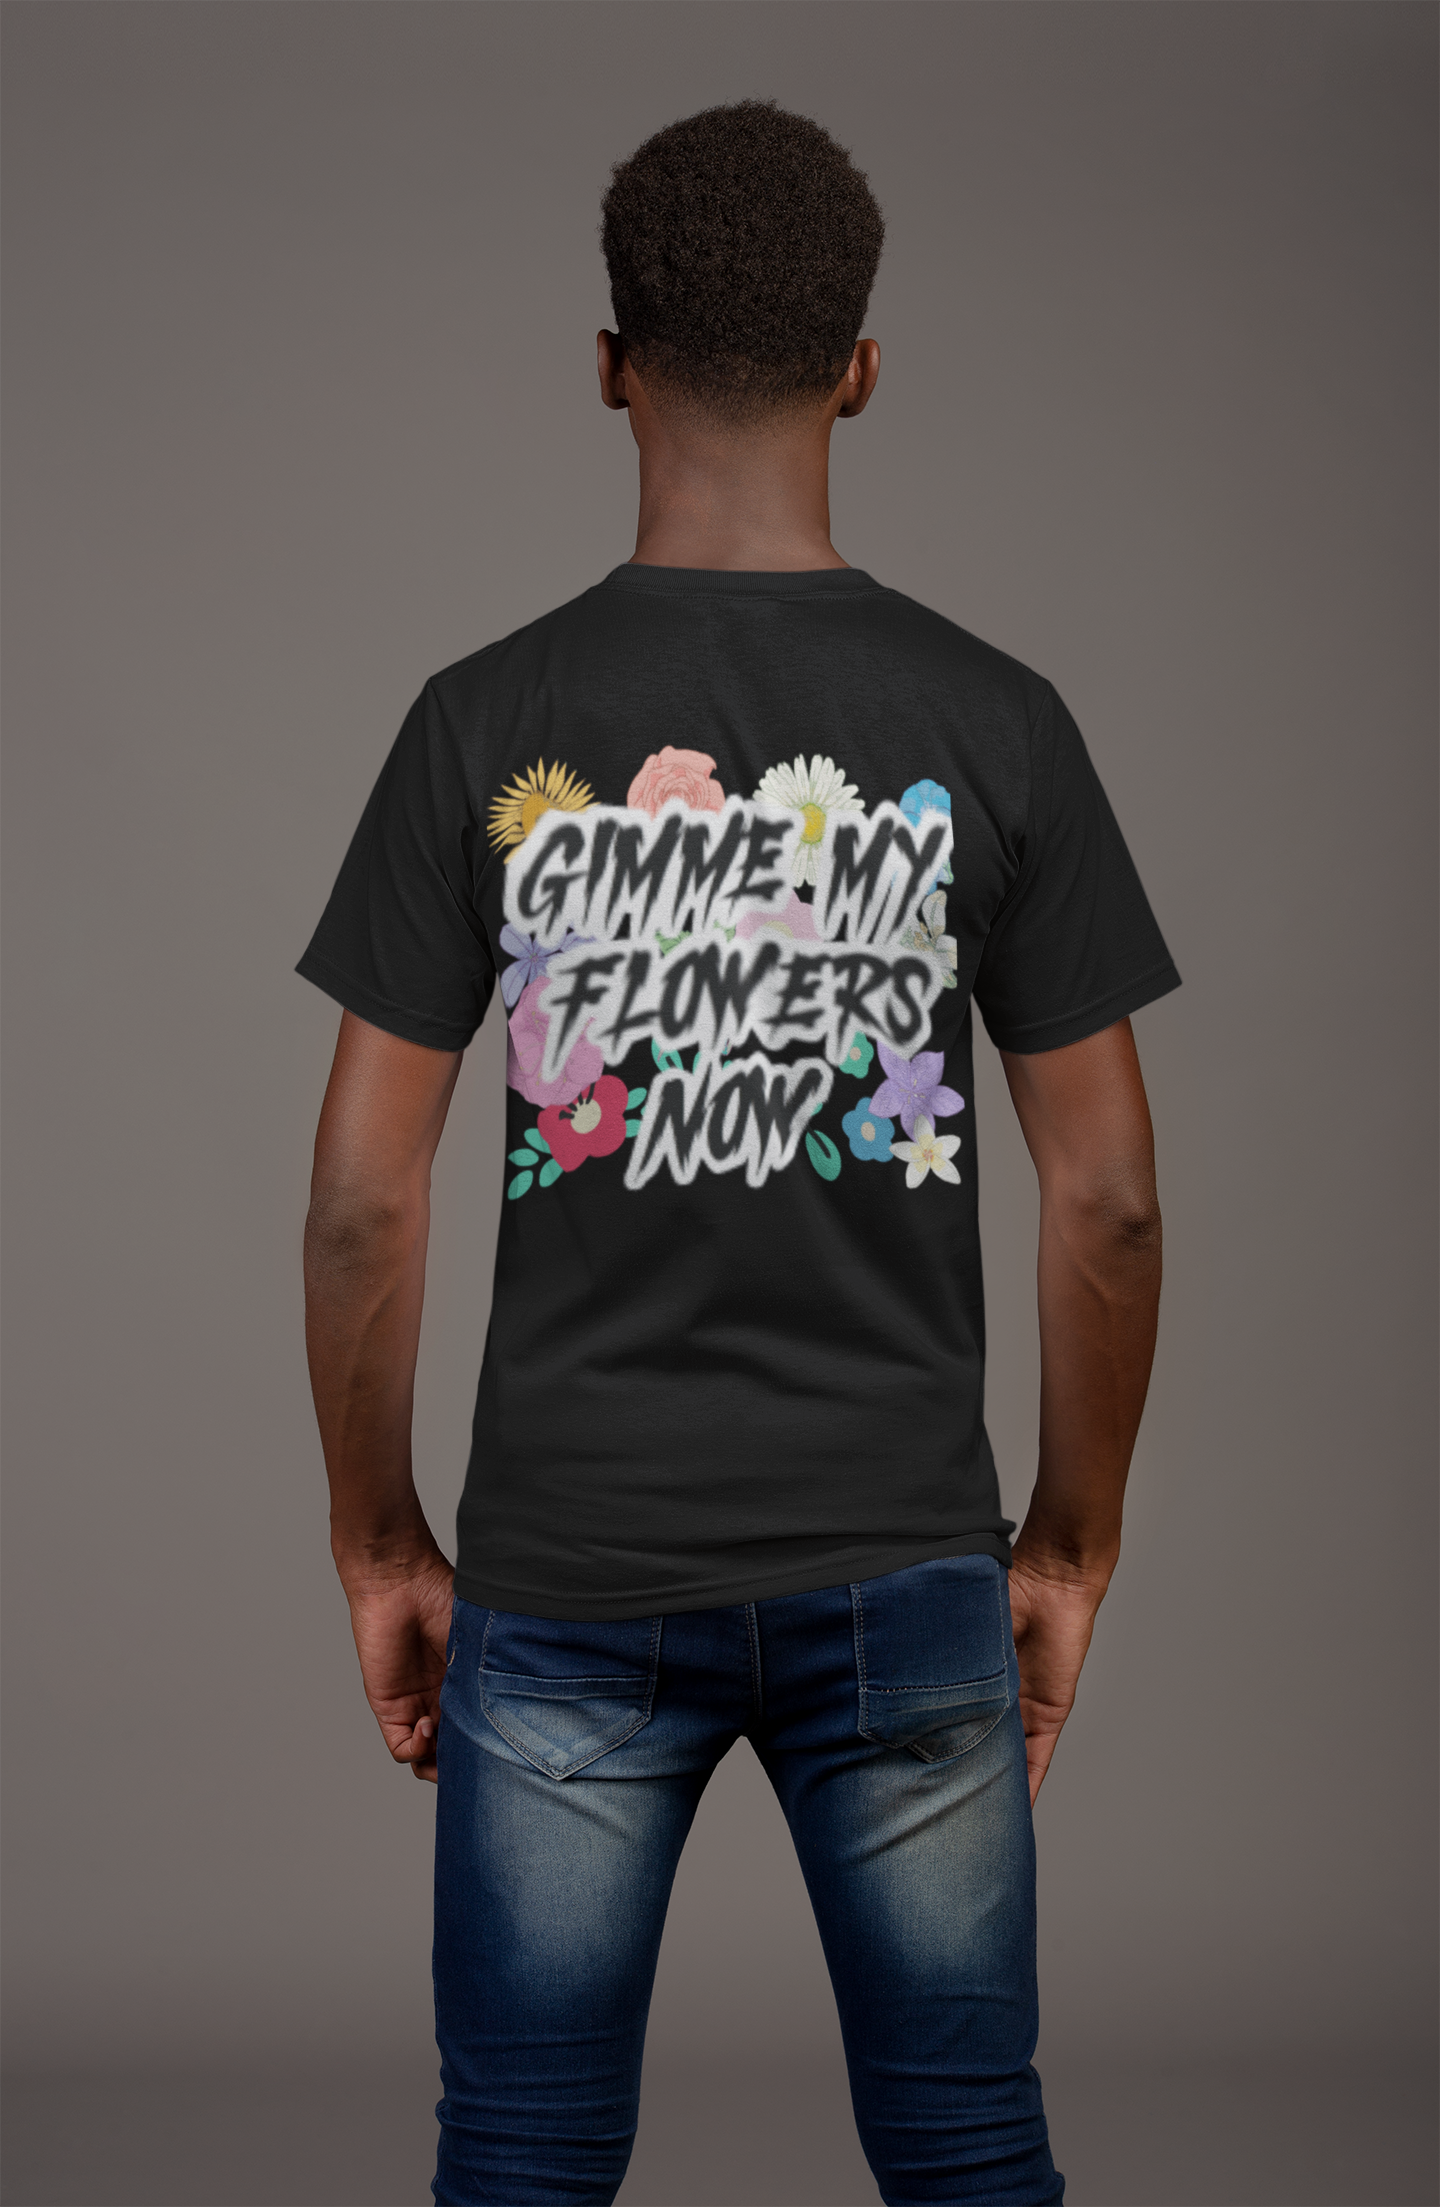 "Gimme my flowers Now" T shirt